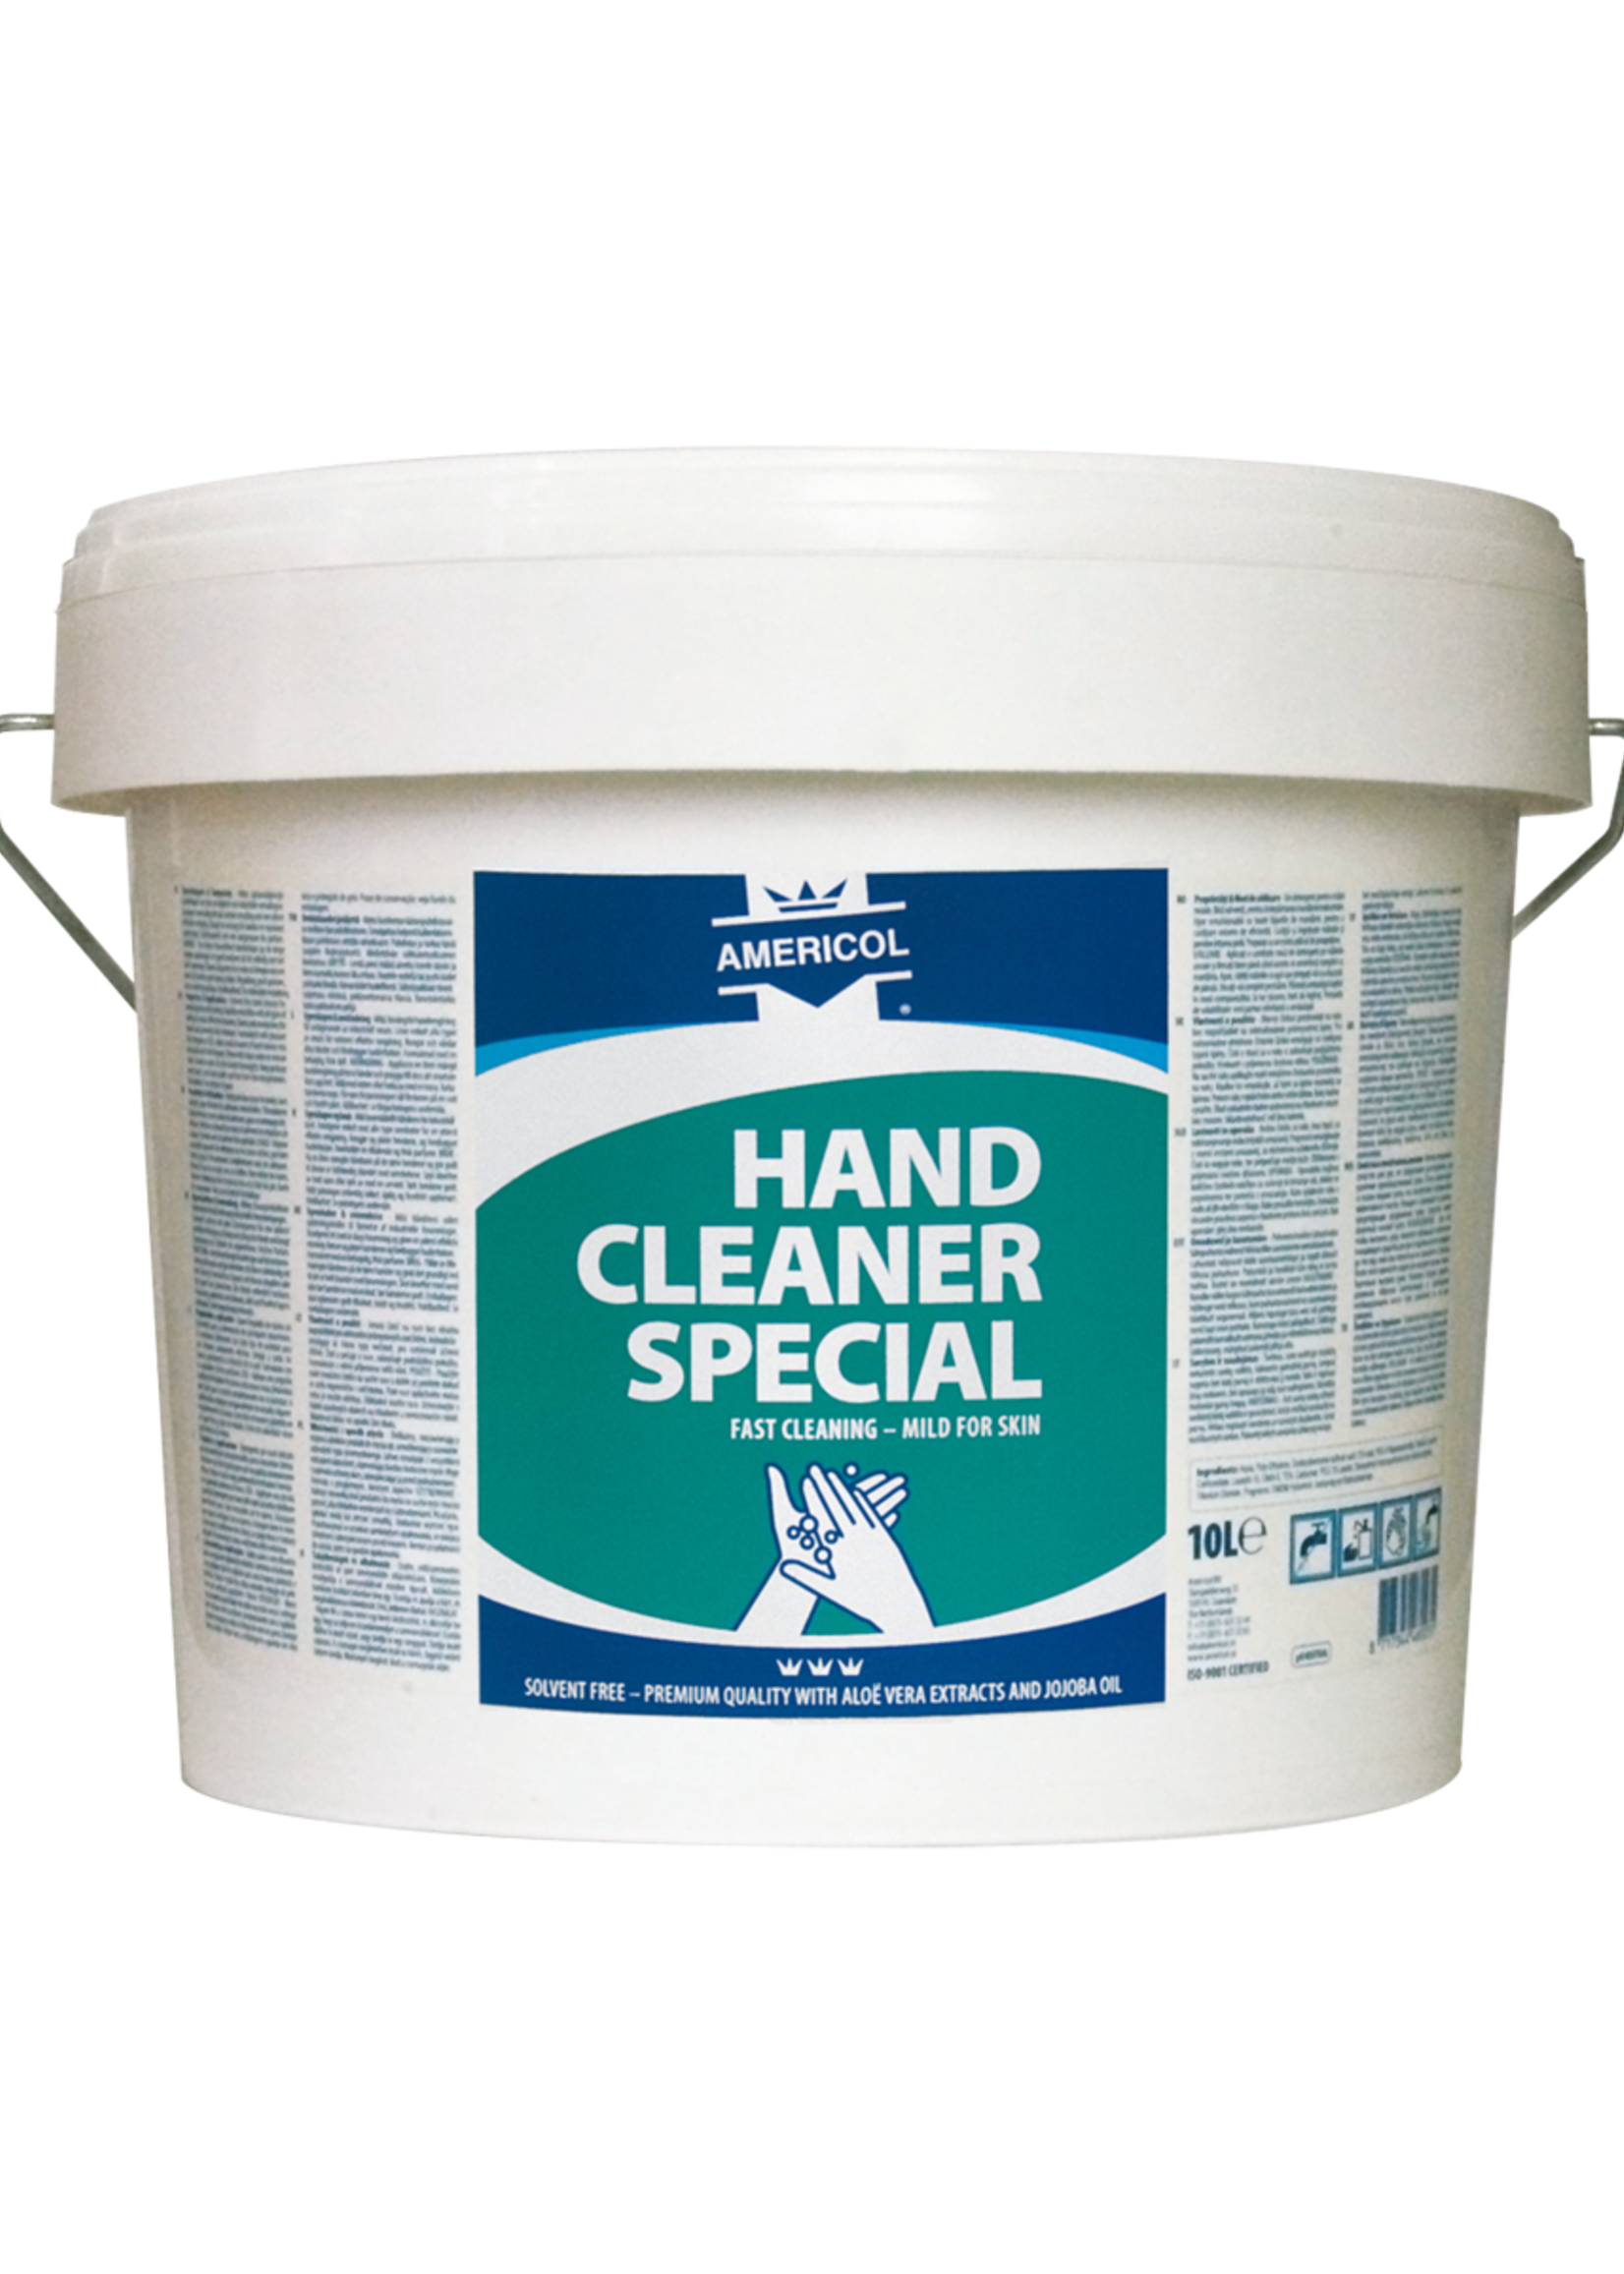 Americol Hand Cleaner Special (10 Liter)